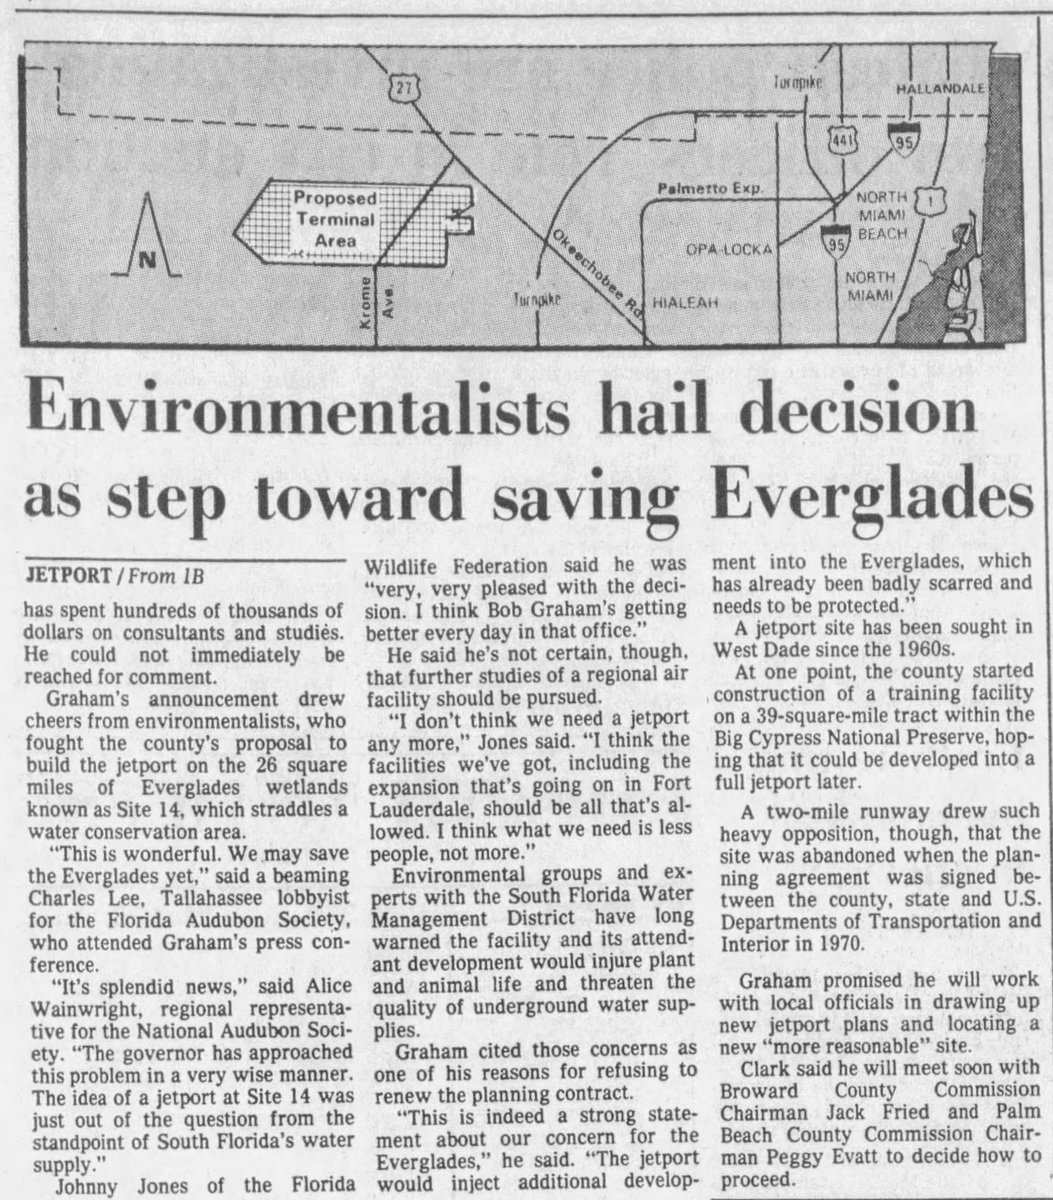 On May 12, 1983, the Miami Herald reported that Governor Bob Graham had rejected plans for an airport in the Everglades in NW Dade County near the intersection of Krome Avenue and US 27. The news was celebrated by environmentalists.